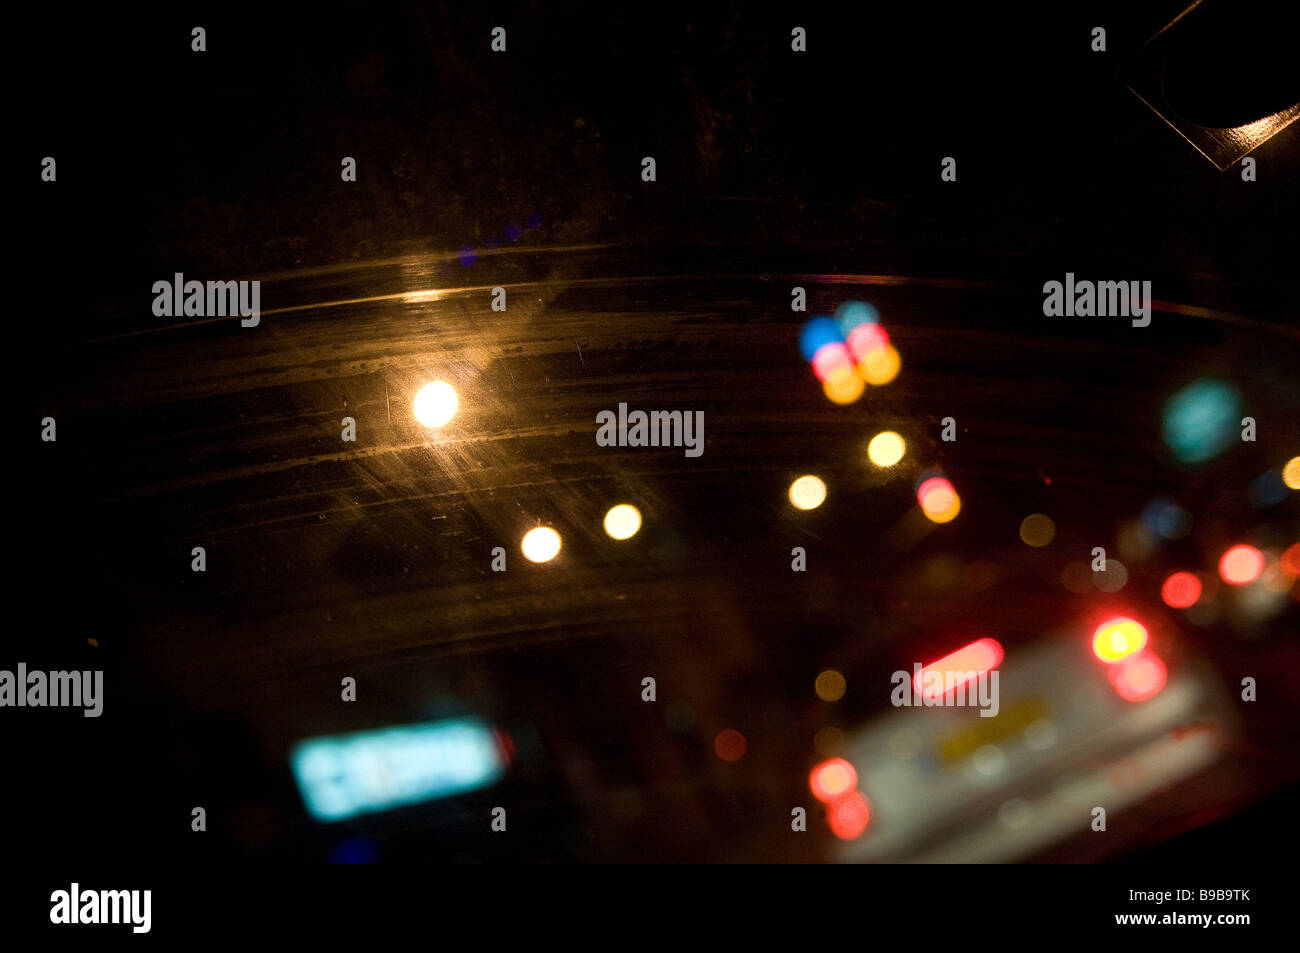 Blurred vision as seen through front car windshield at night in Tel Aviv Israel Stock Photo